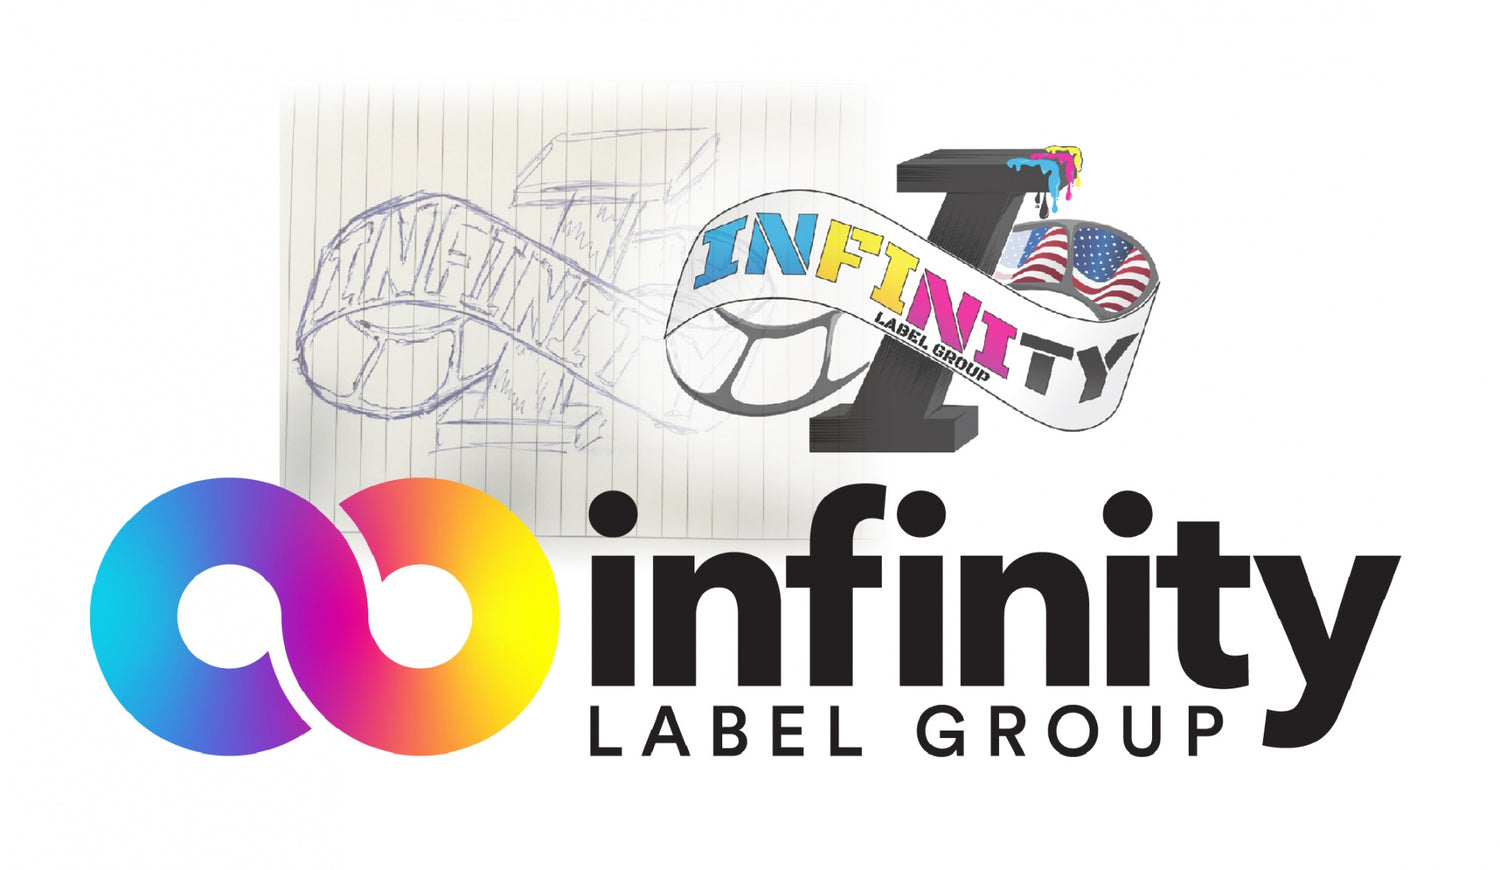 About Infinity Label Group